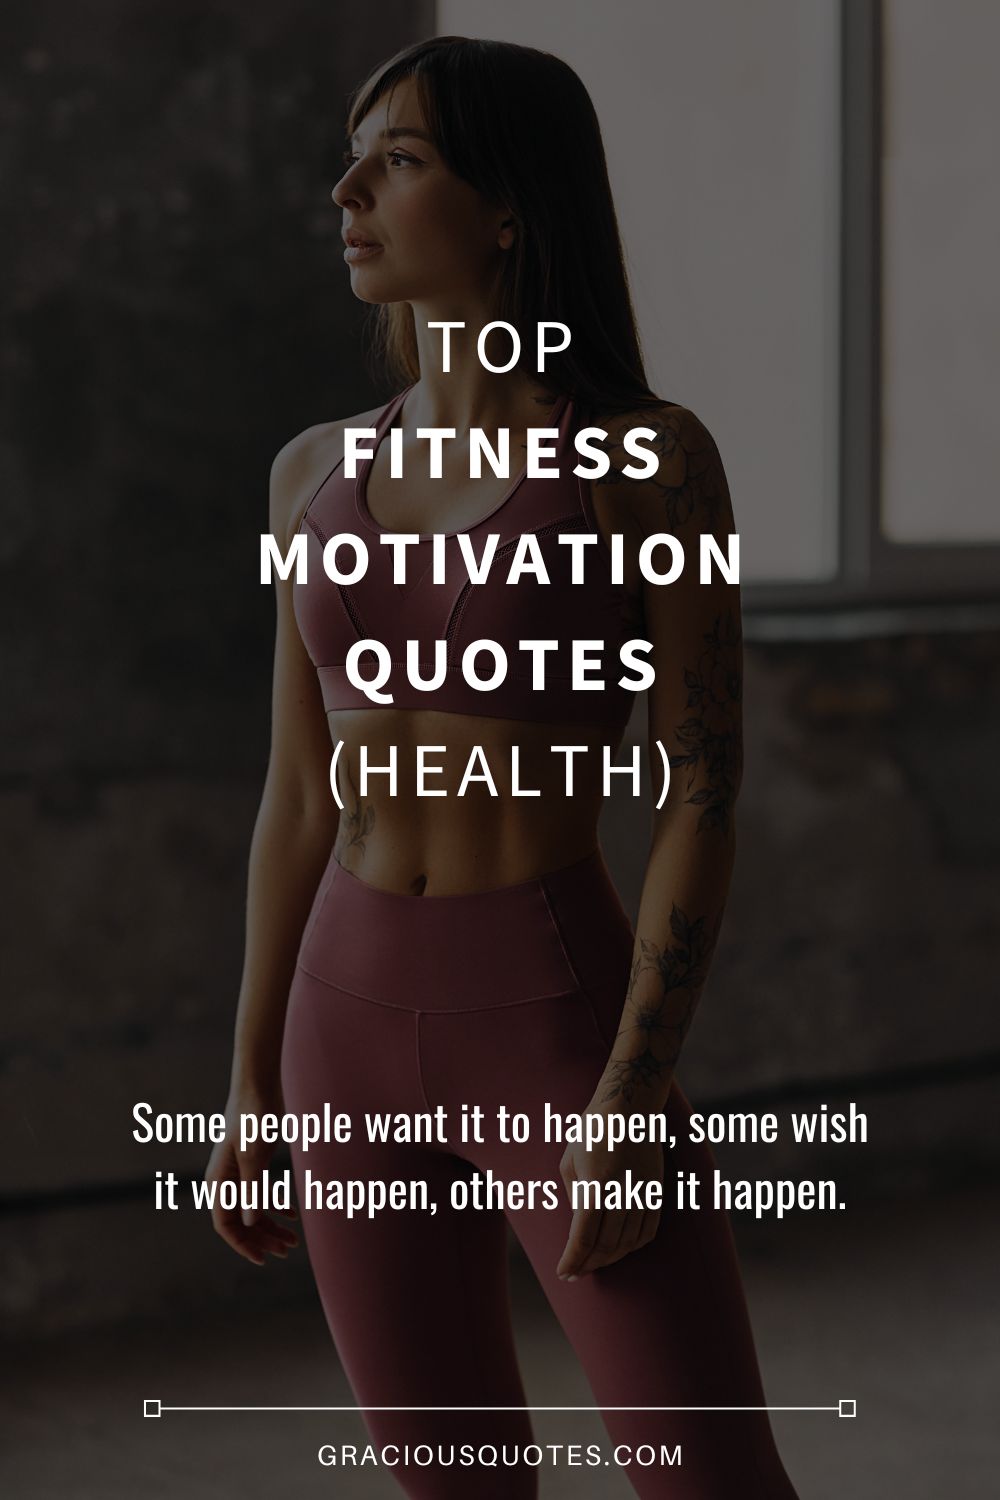 Top 63 Fitness Motivation Quotes (HEALTH)